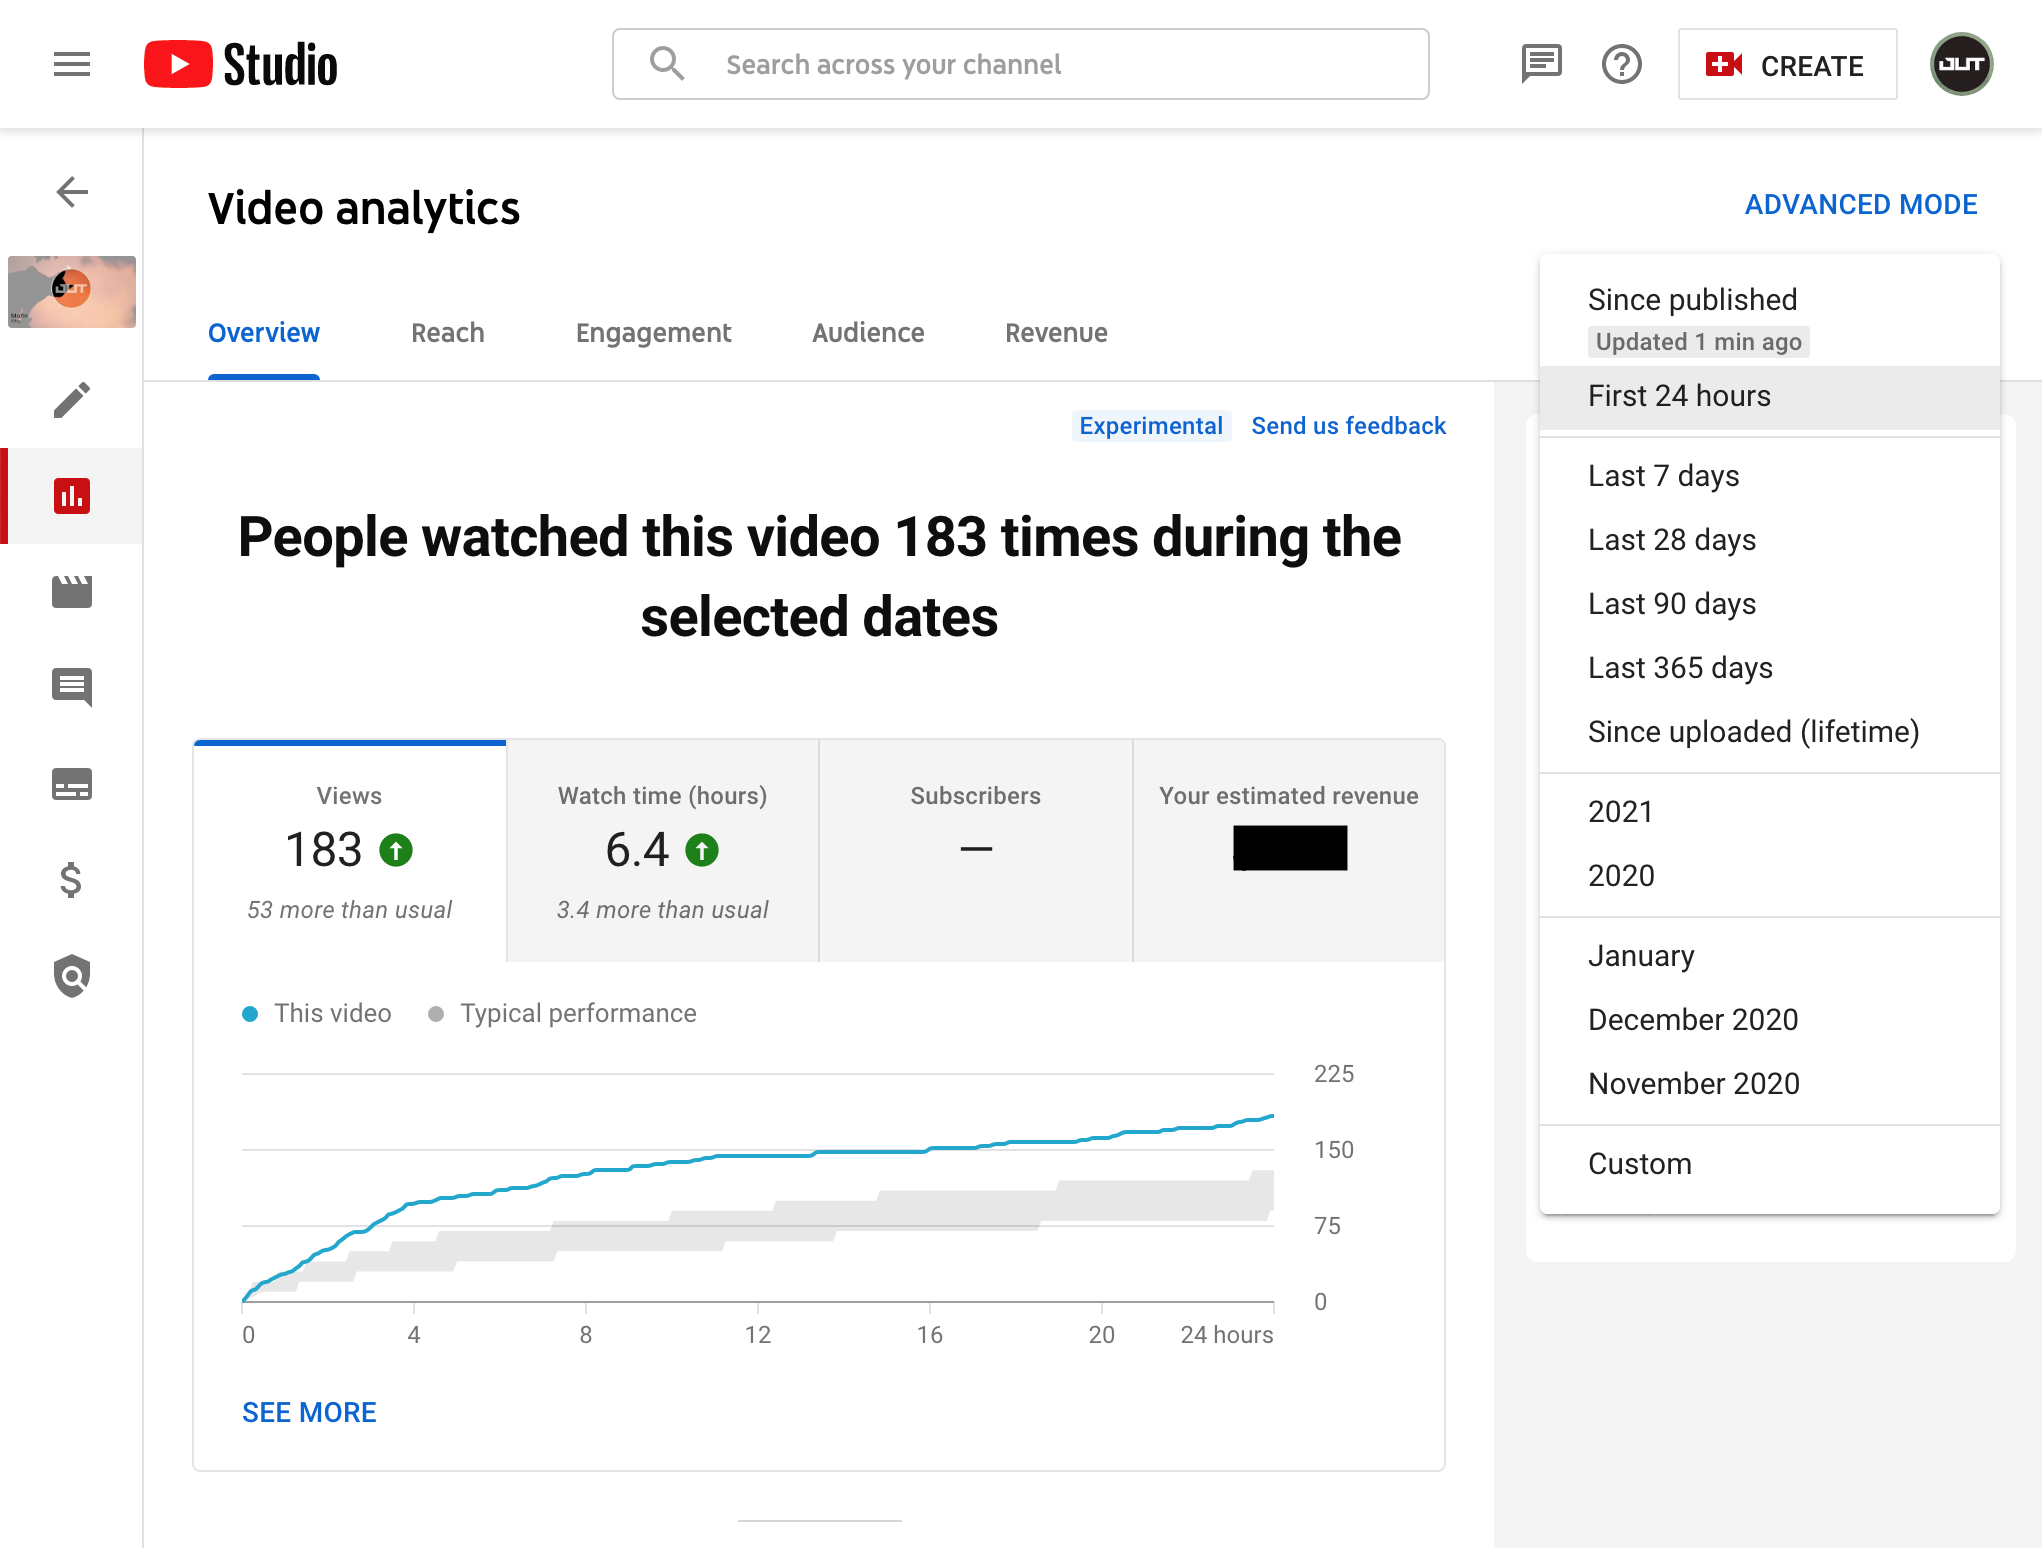 YouTube add a “First 24 hours” option to video analytics